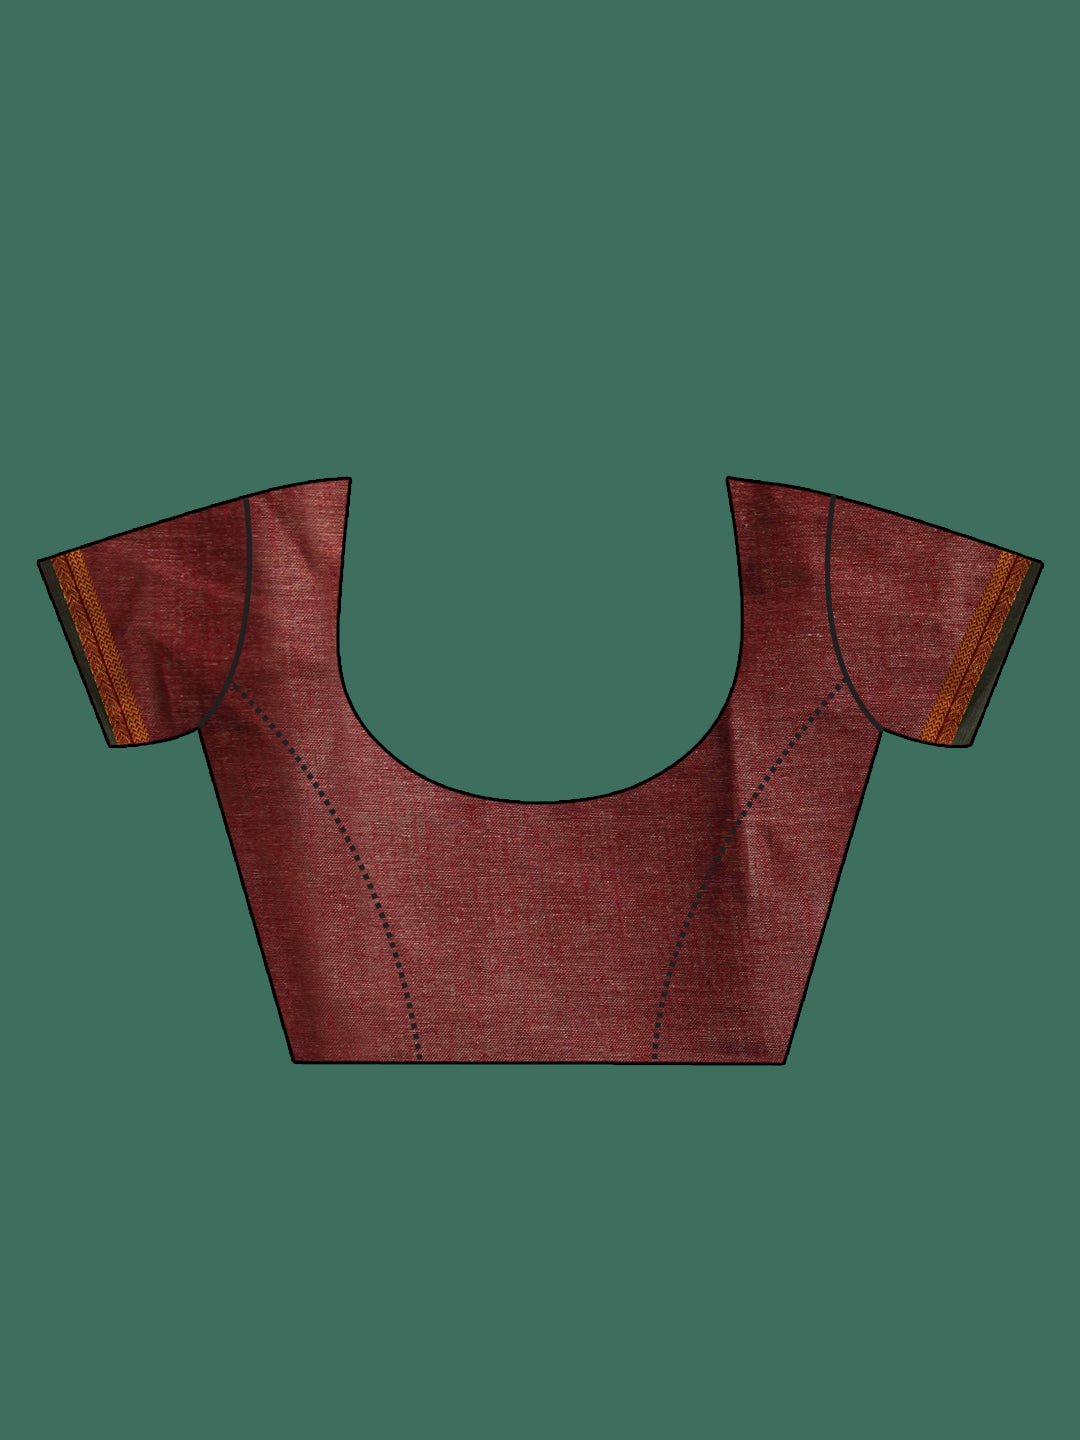 Indethnic Maroon Solid Saree - Blouse Piece View